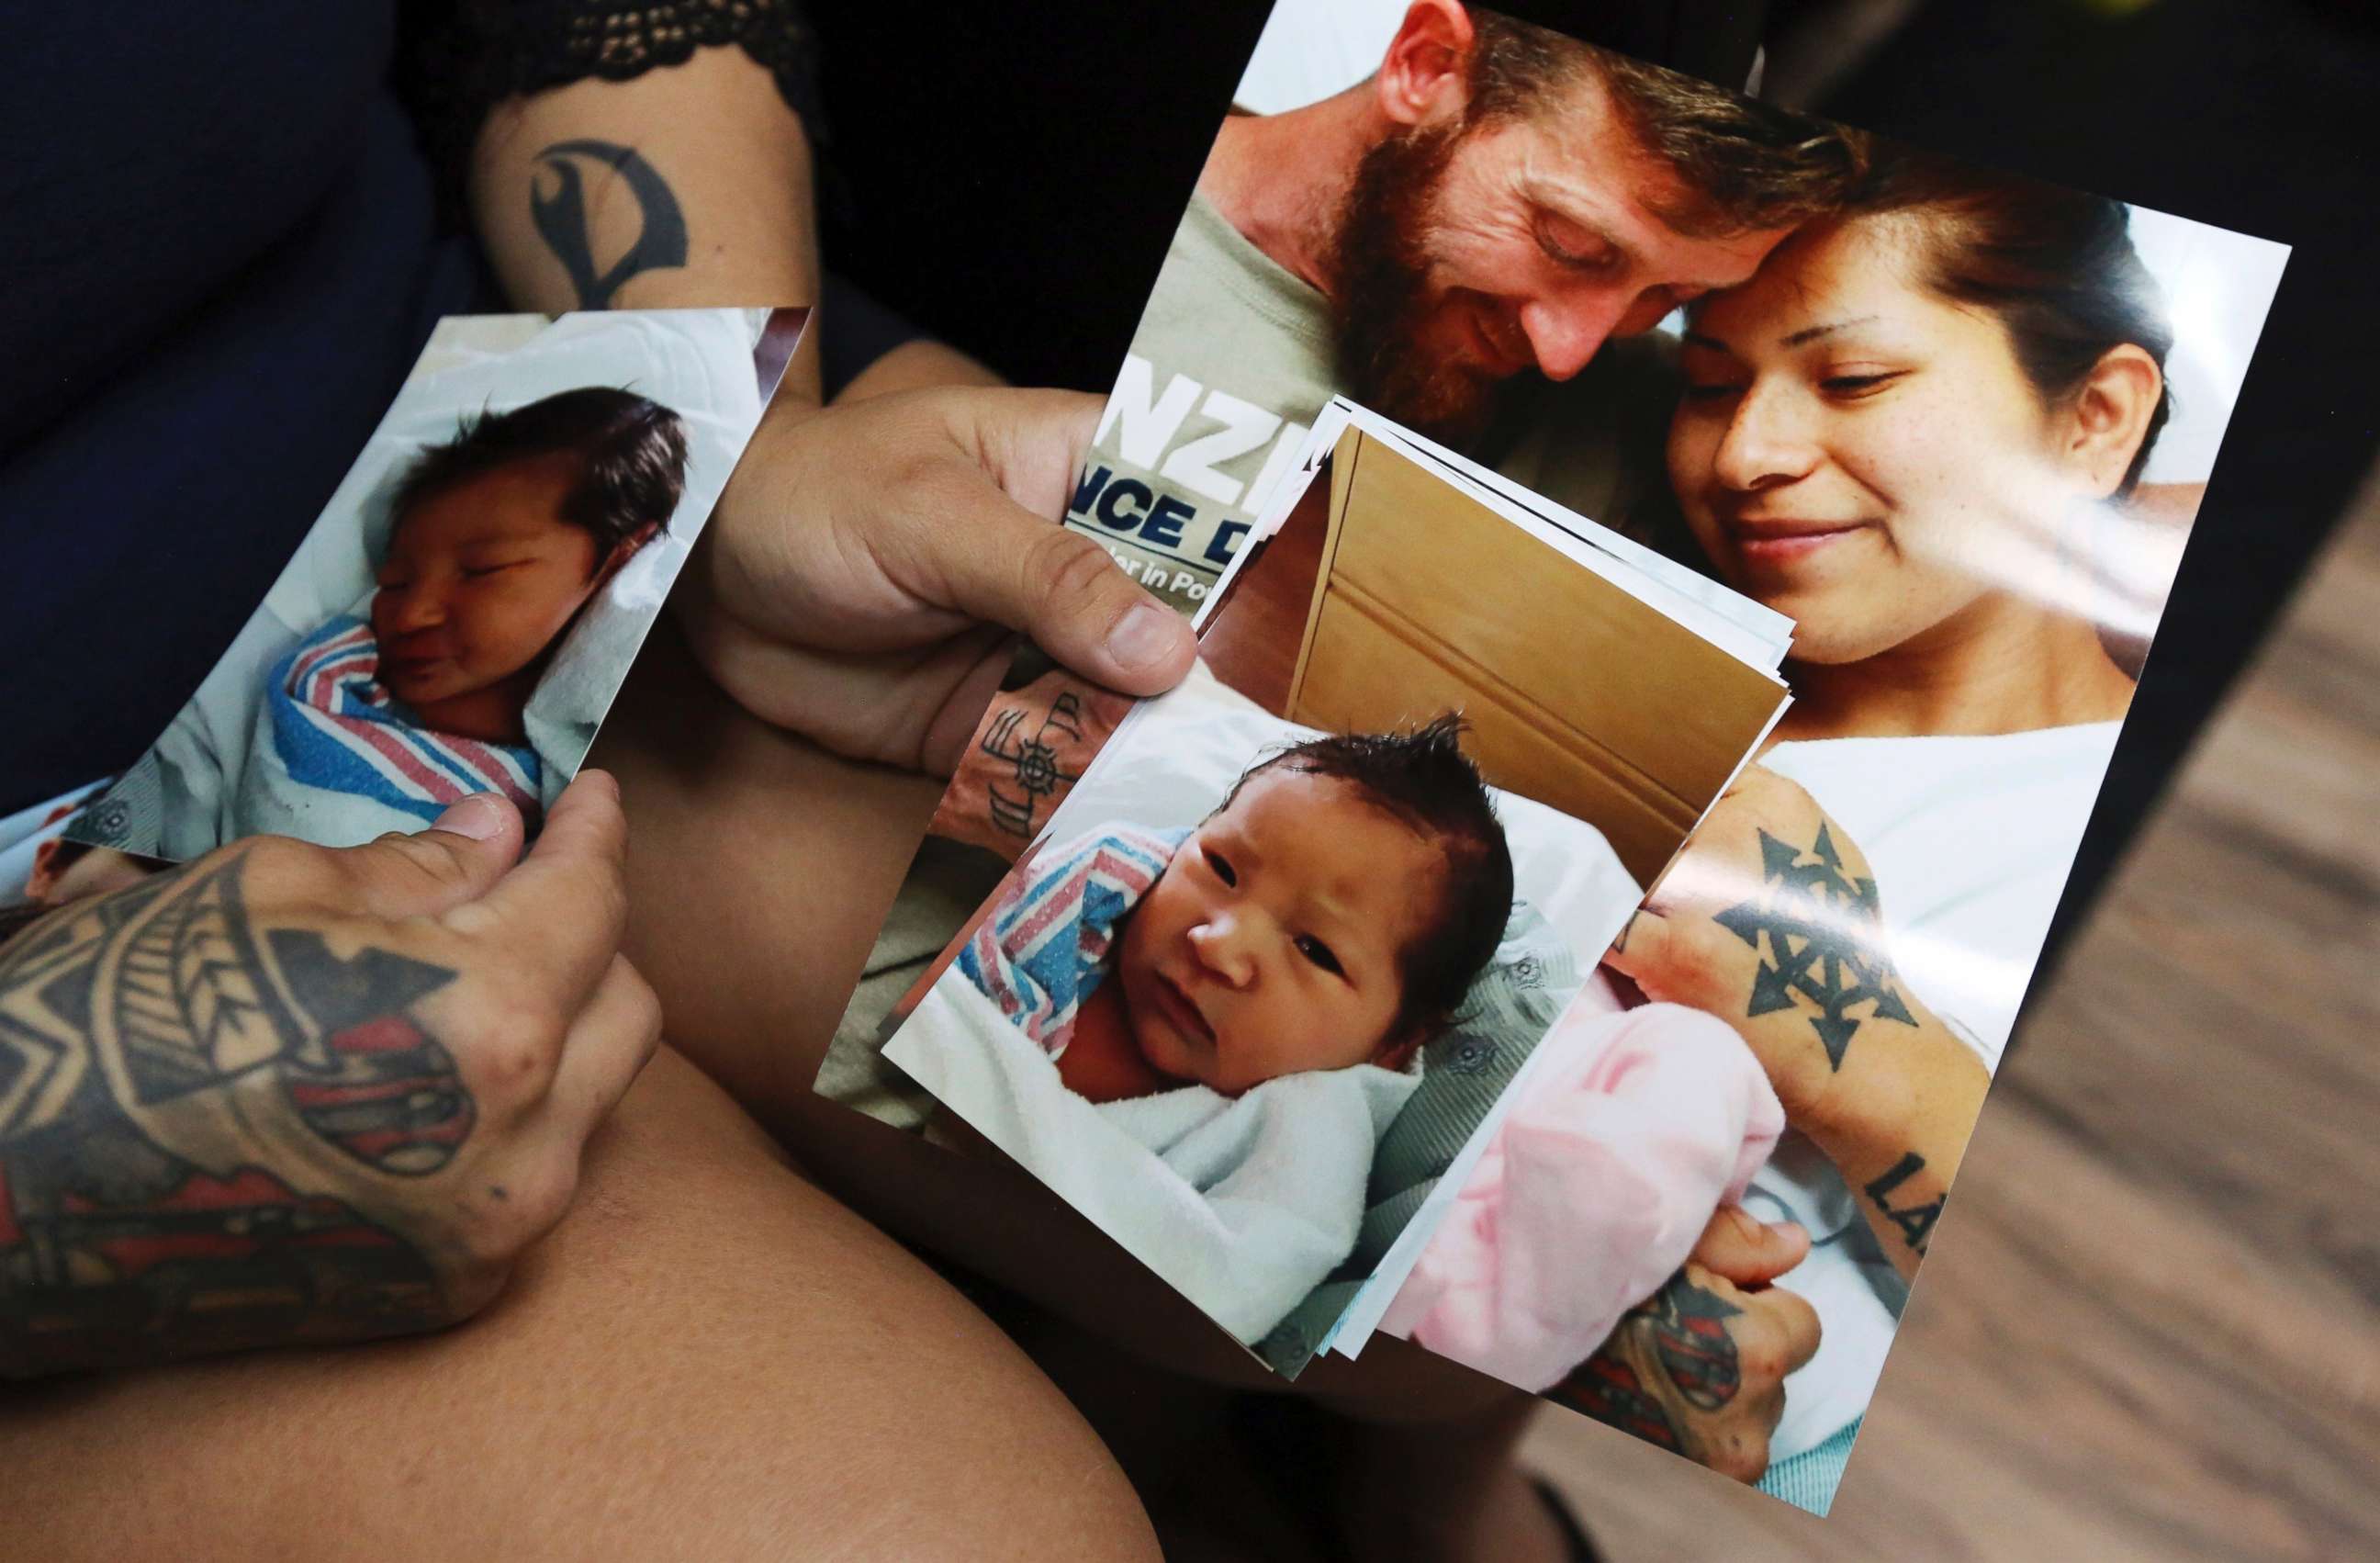 PHOTO: Rebecca Sanders, who is part of the Miccosukee tribe, shows photos on March 20, 2018 of her and boyfriend Justin Johnson's baby Ingrid Ronan Johnson, born March 16, in Miami, Fla.